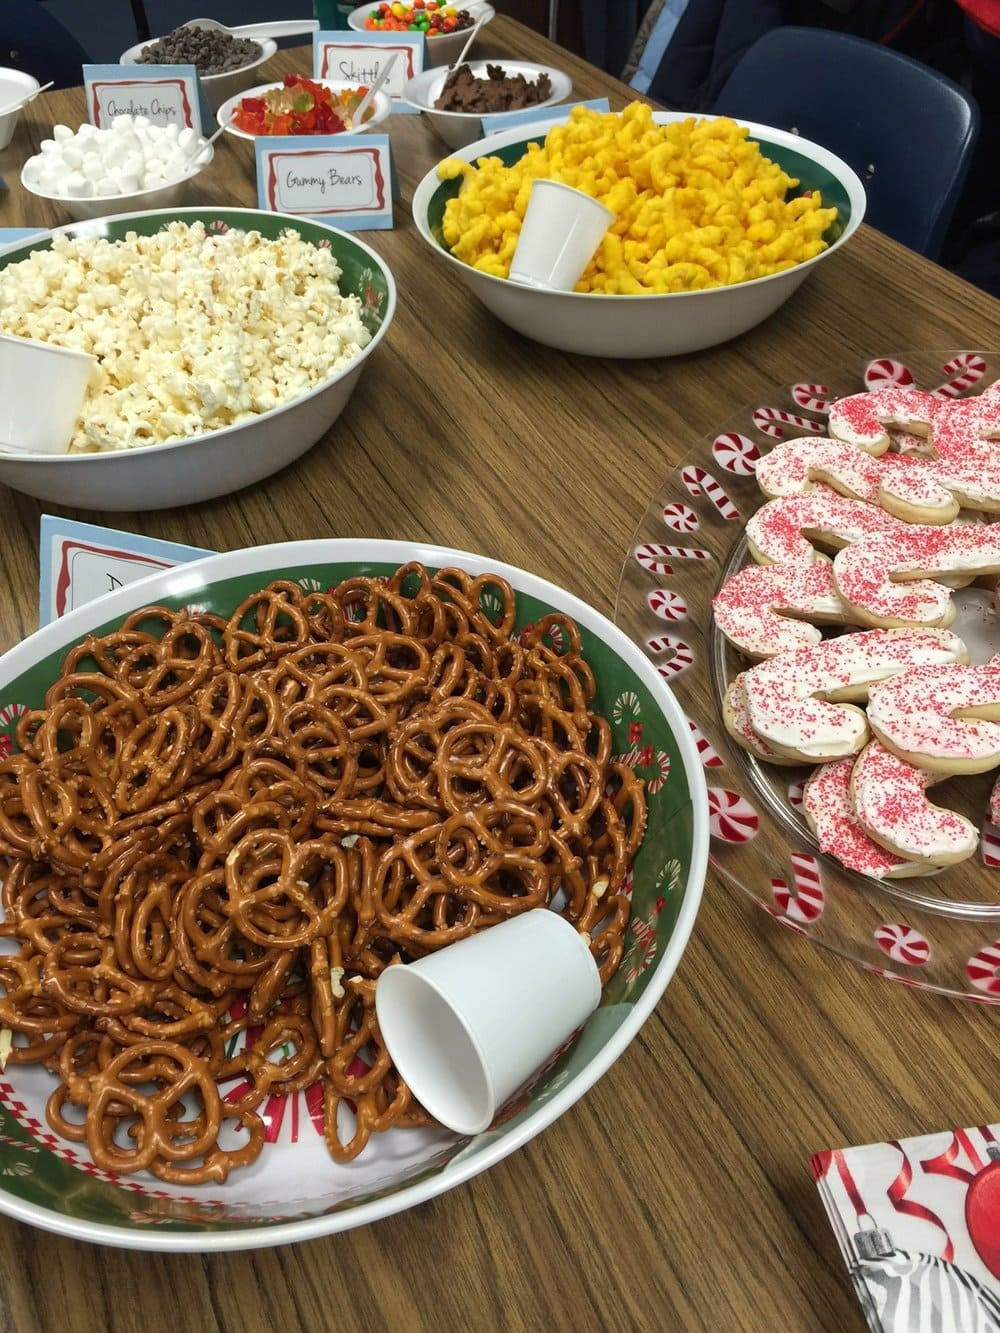 School Party Food Ideas
 Christmas School Party Ideas for Fifth Graders Home & Plate